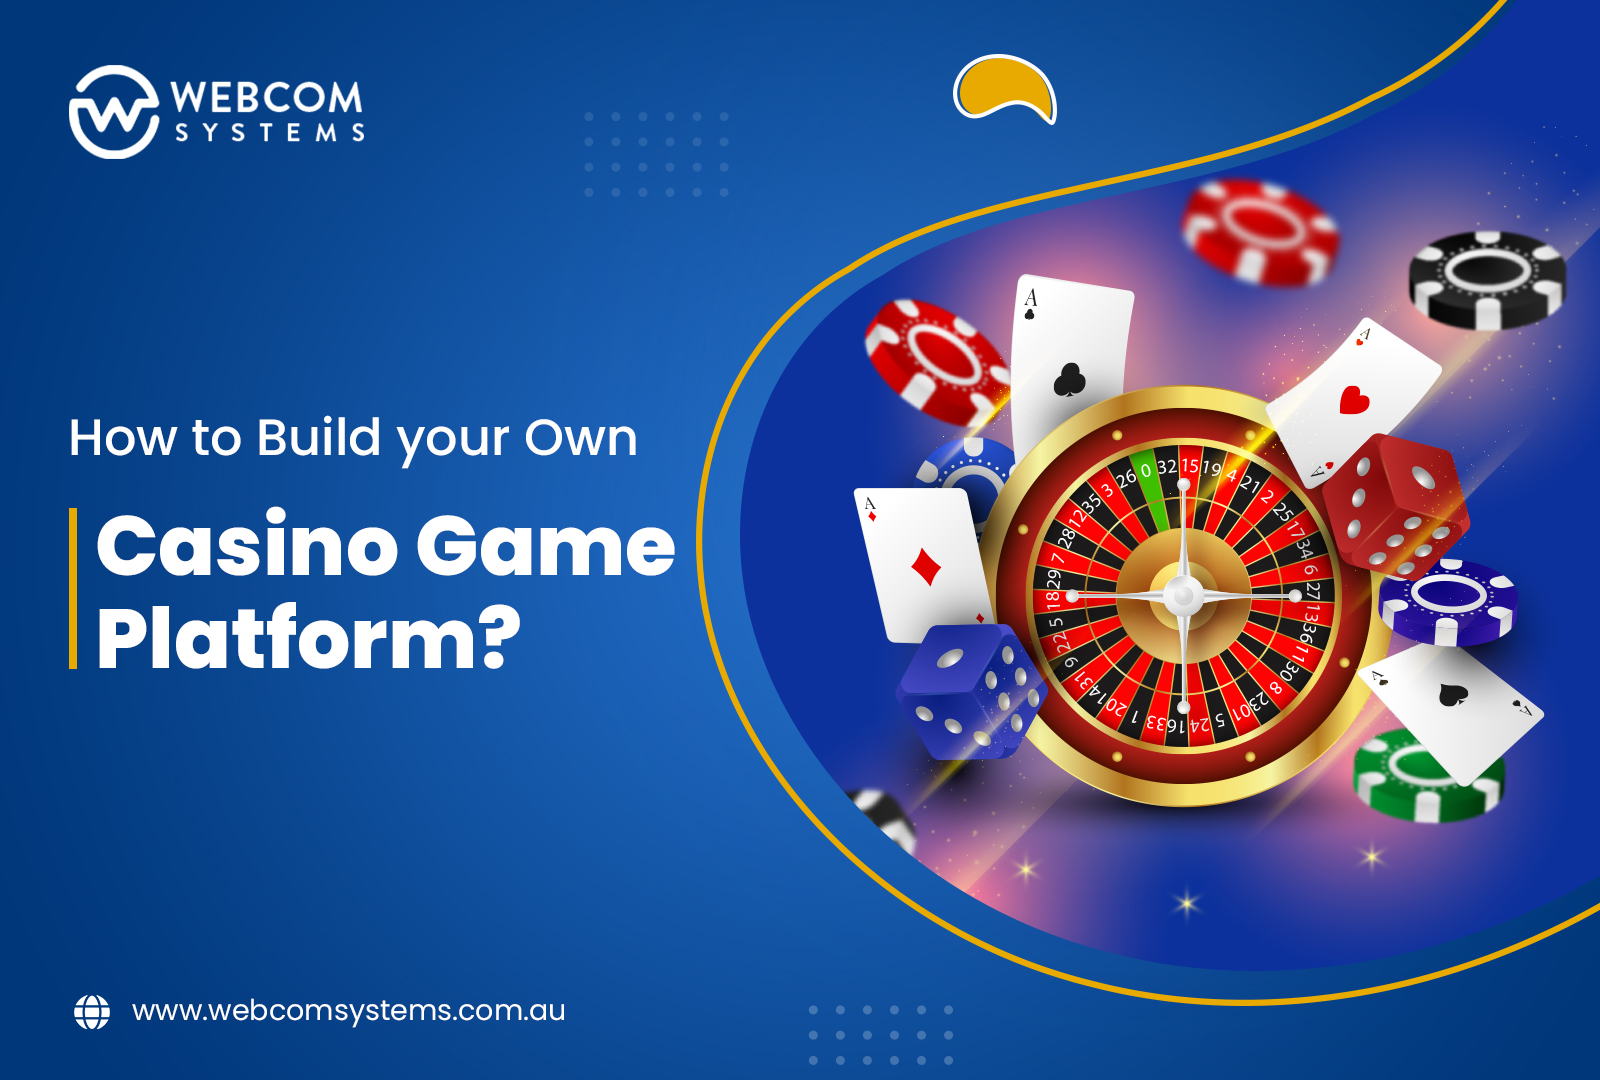 How to Build Your Own Casino Game Platform?